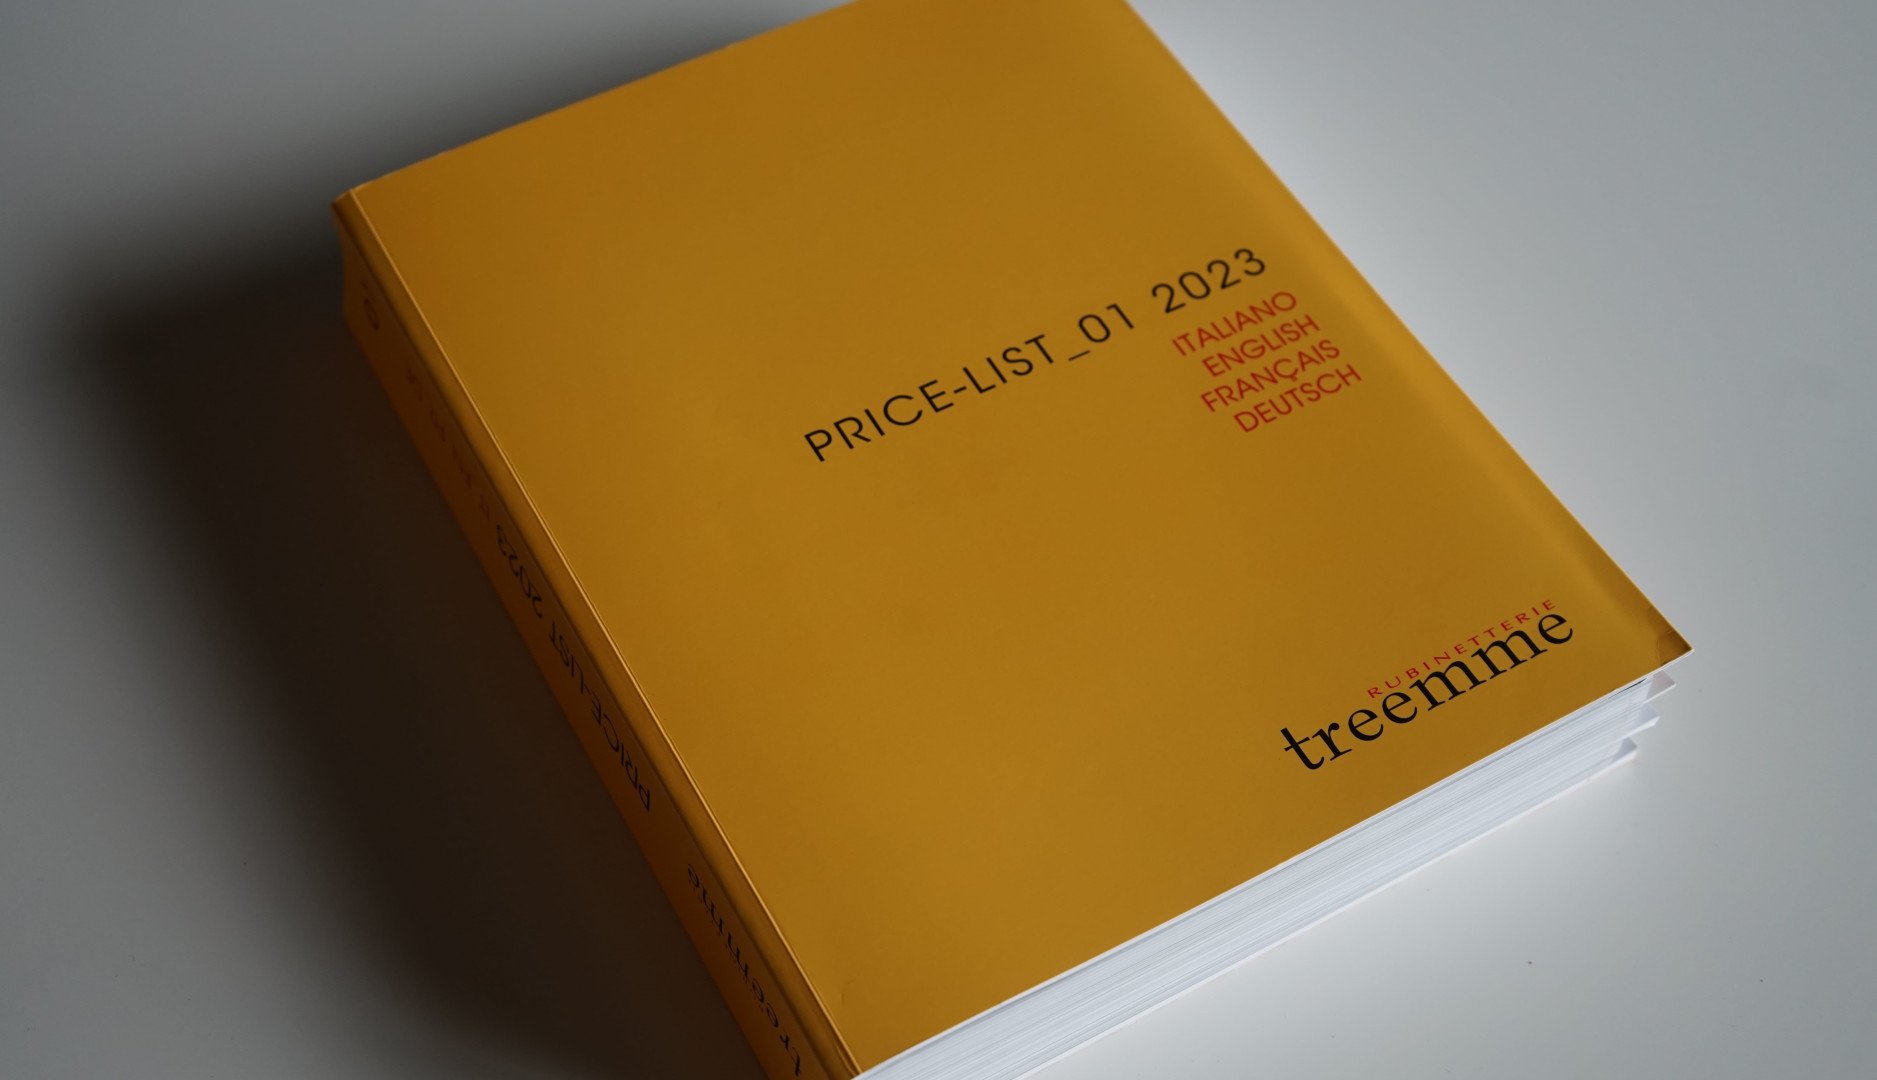 The new design price list from Rubinetterie Treemme has arrived!